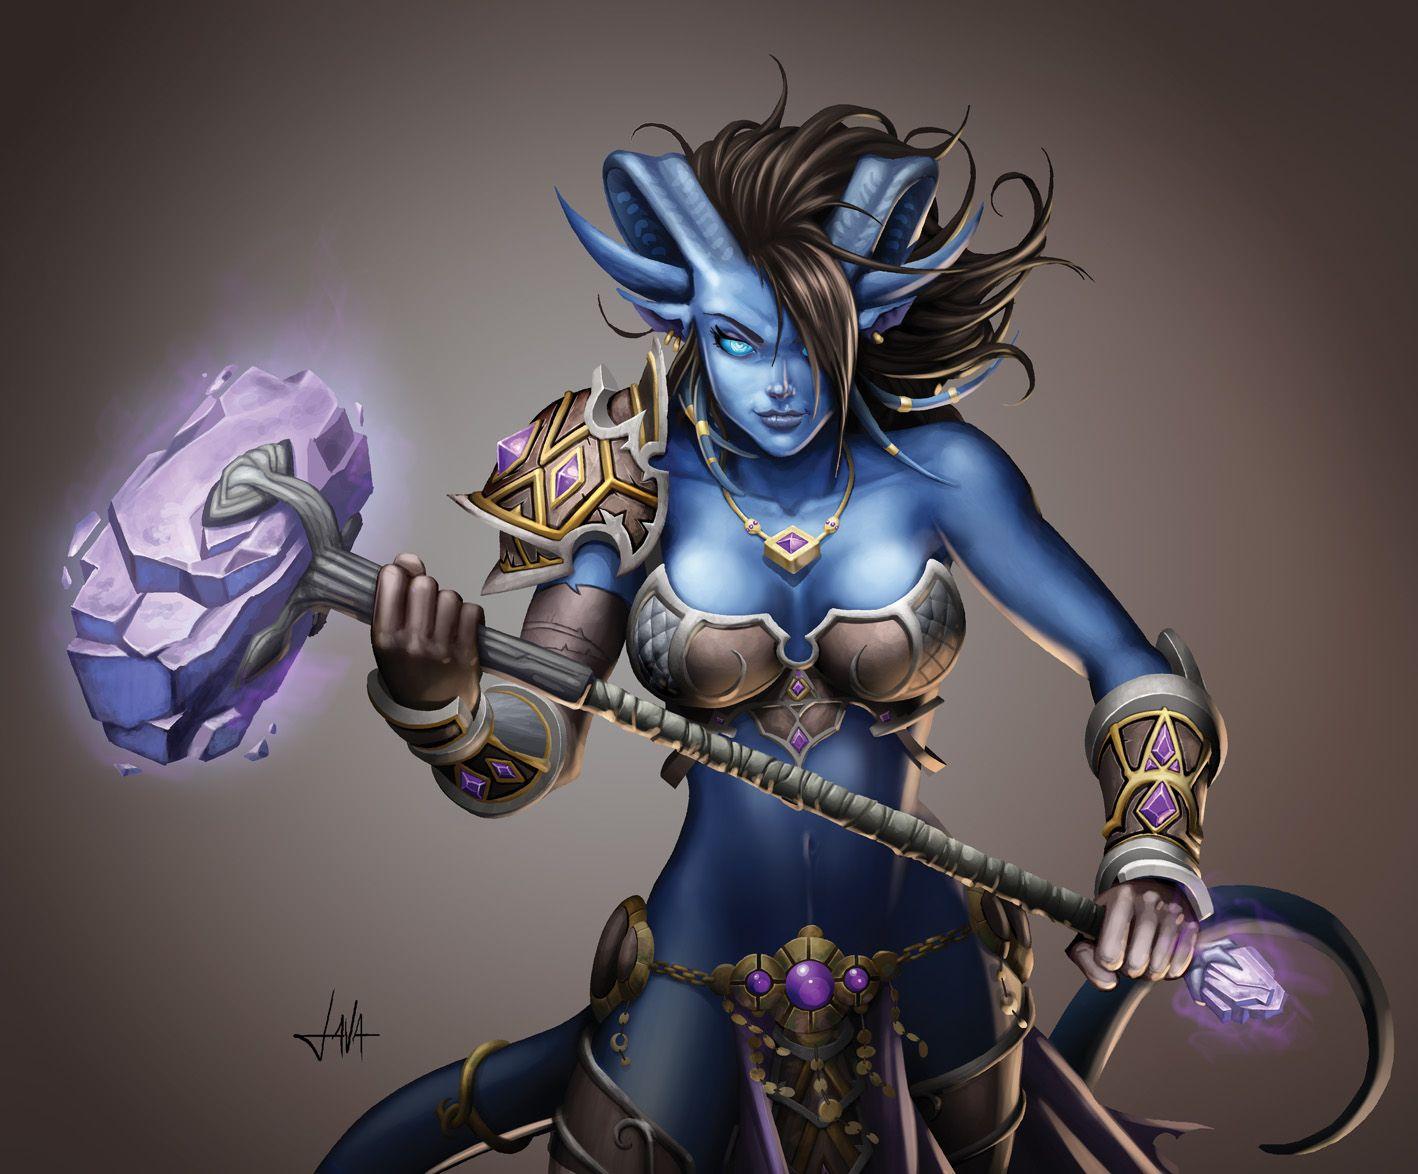 Draenei Wallpapers Top Free Draenei Backgrounds Wallpaperaccess